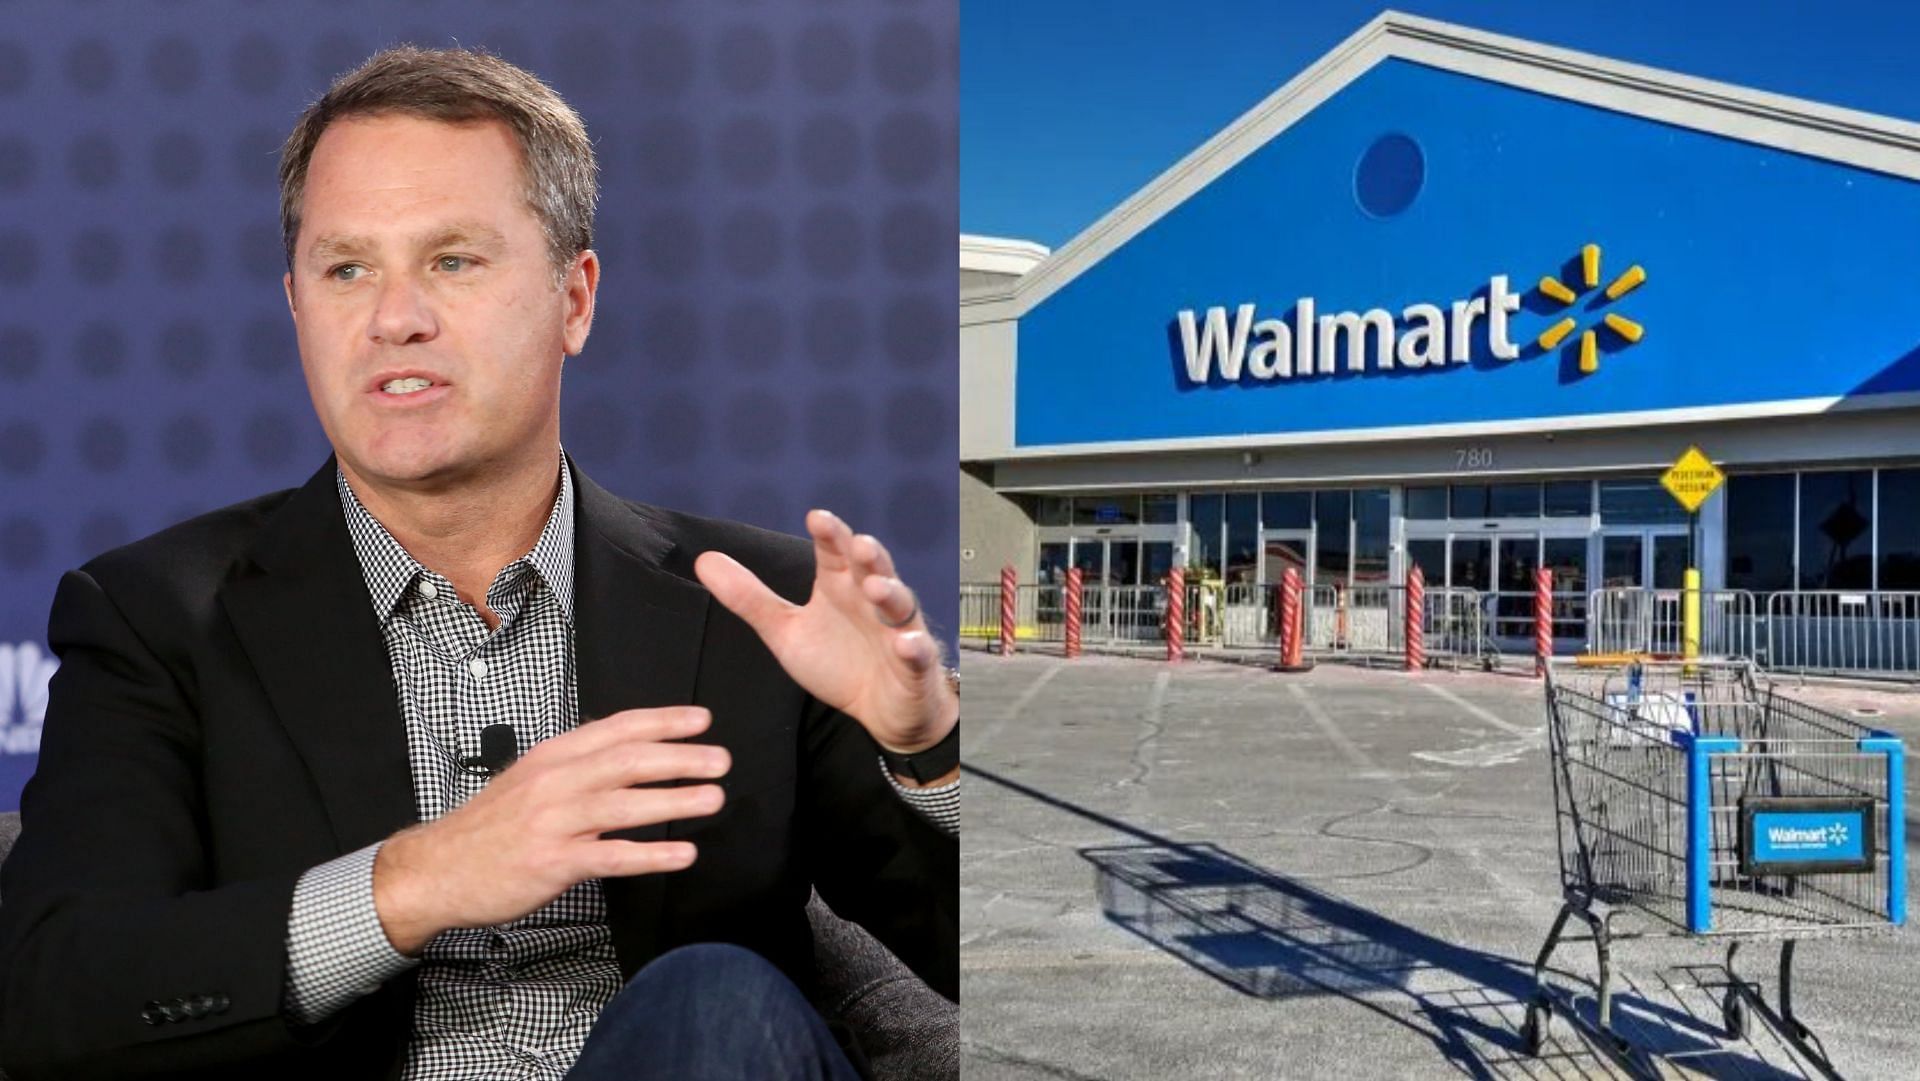 Walmart may close stores, increase prices due to theft, CEO says